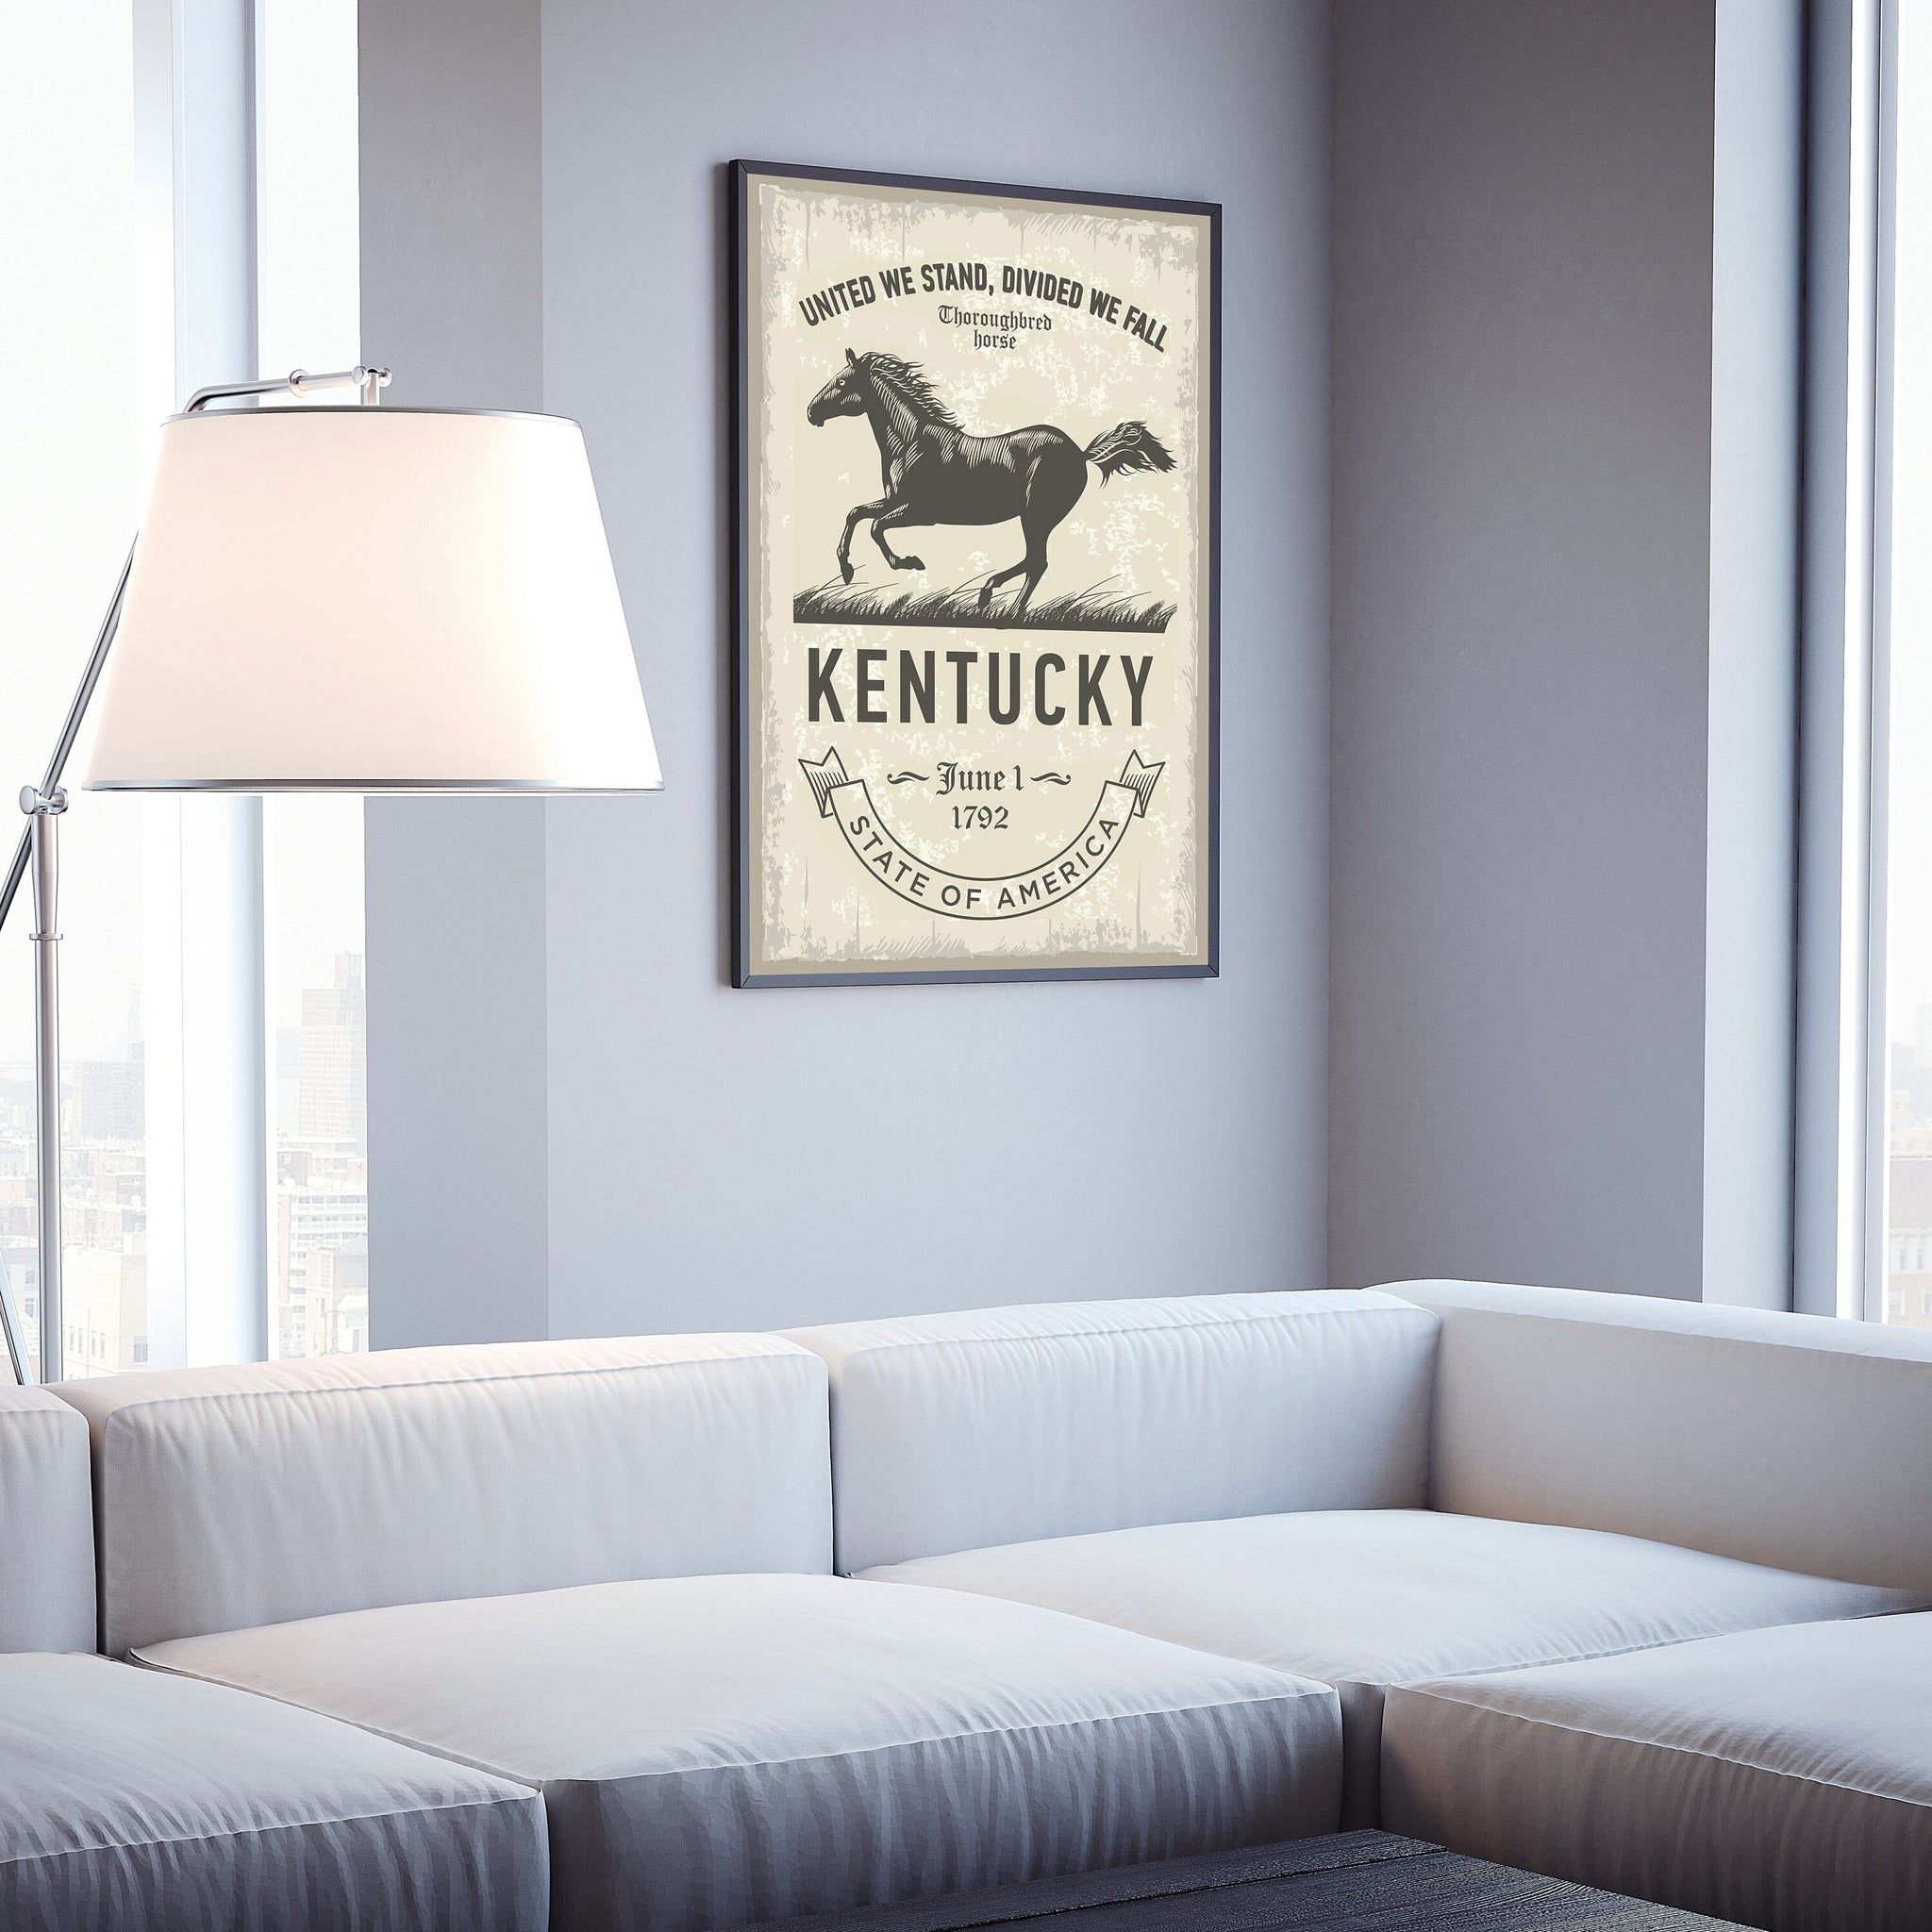 Kentucky State Symbol Poster, Kentucky State Poster Print, Kentucky State Emblem Poster, Retro Travel State Poster, Home and Office Wall Art